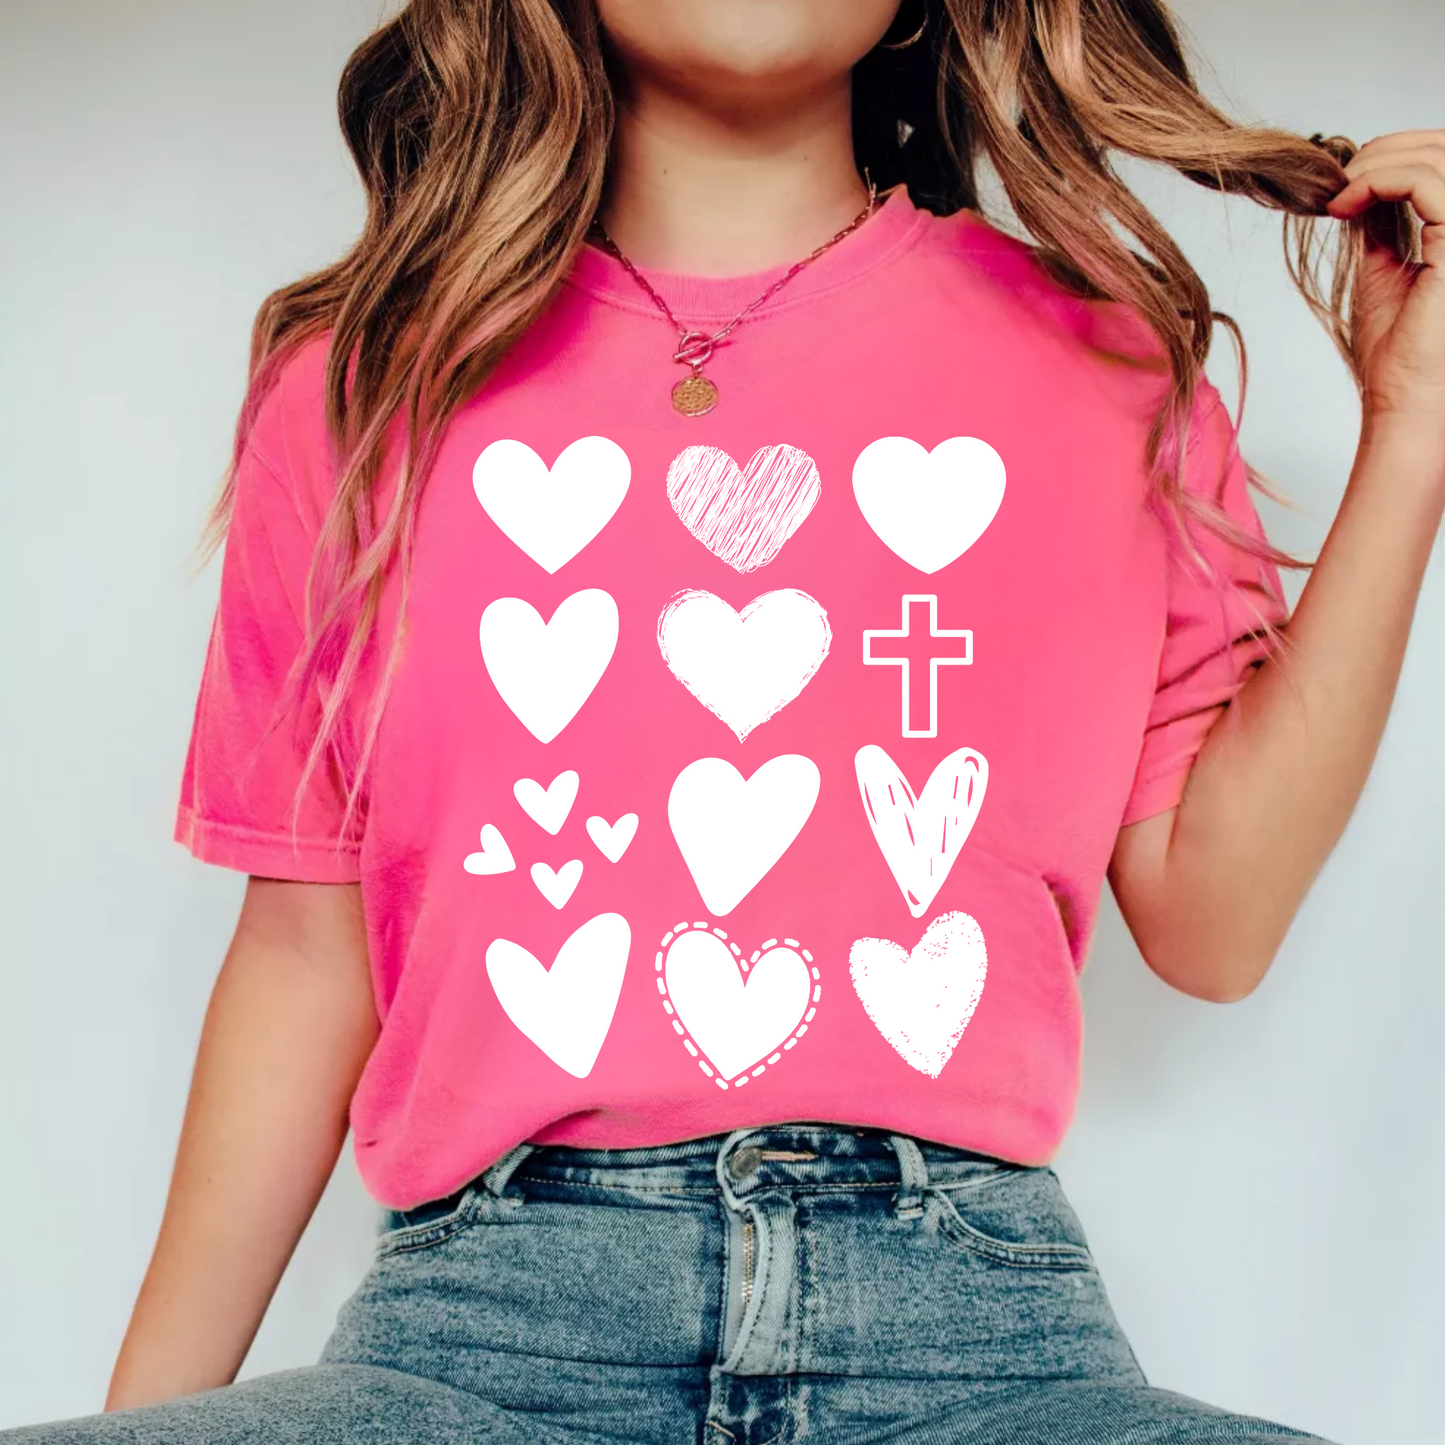 (shirt not included) White Hearts w/ Cross   - Screen print Transfer